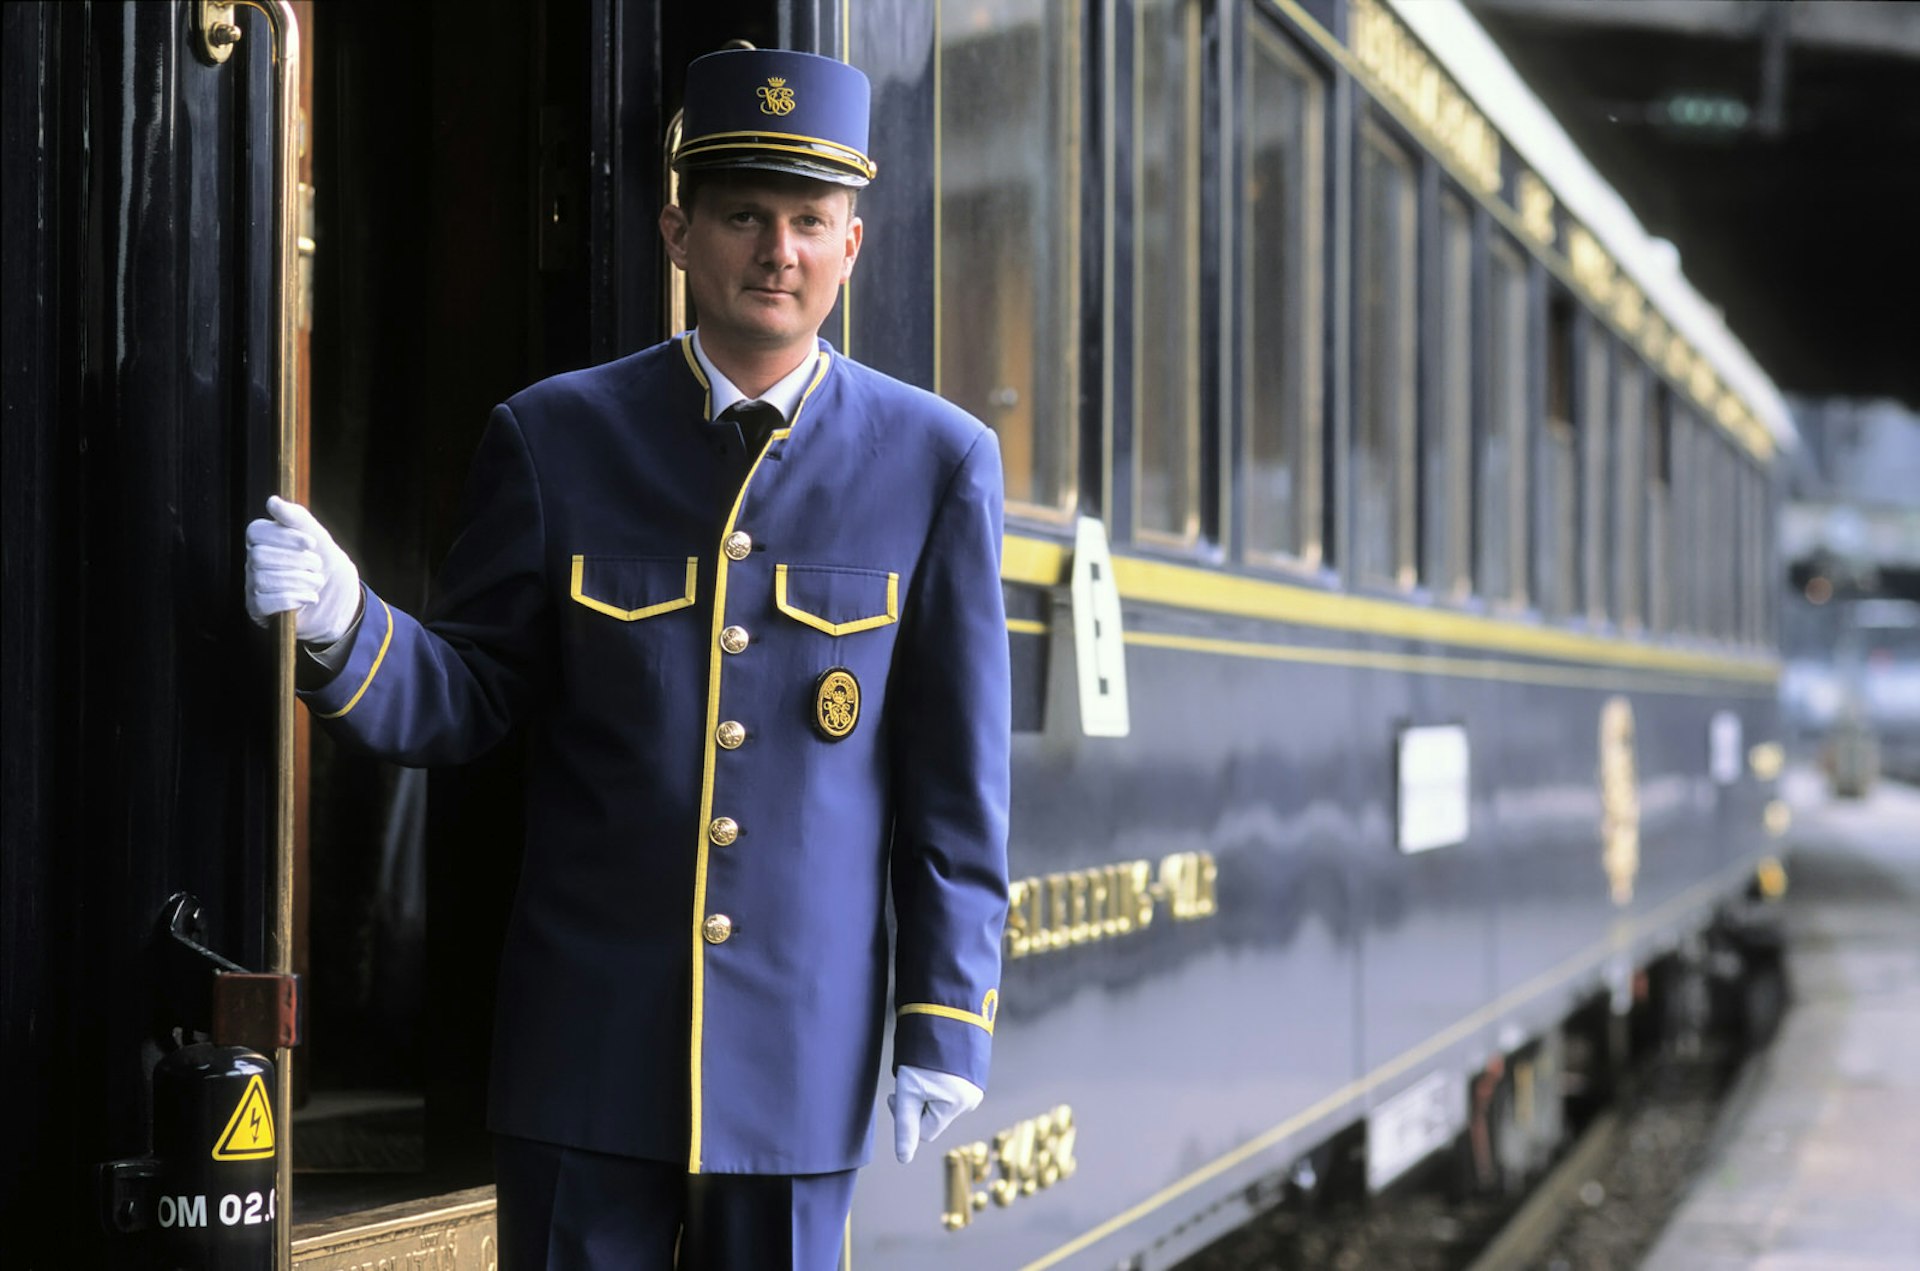 All aboard the Orient Express! 